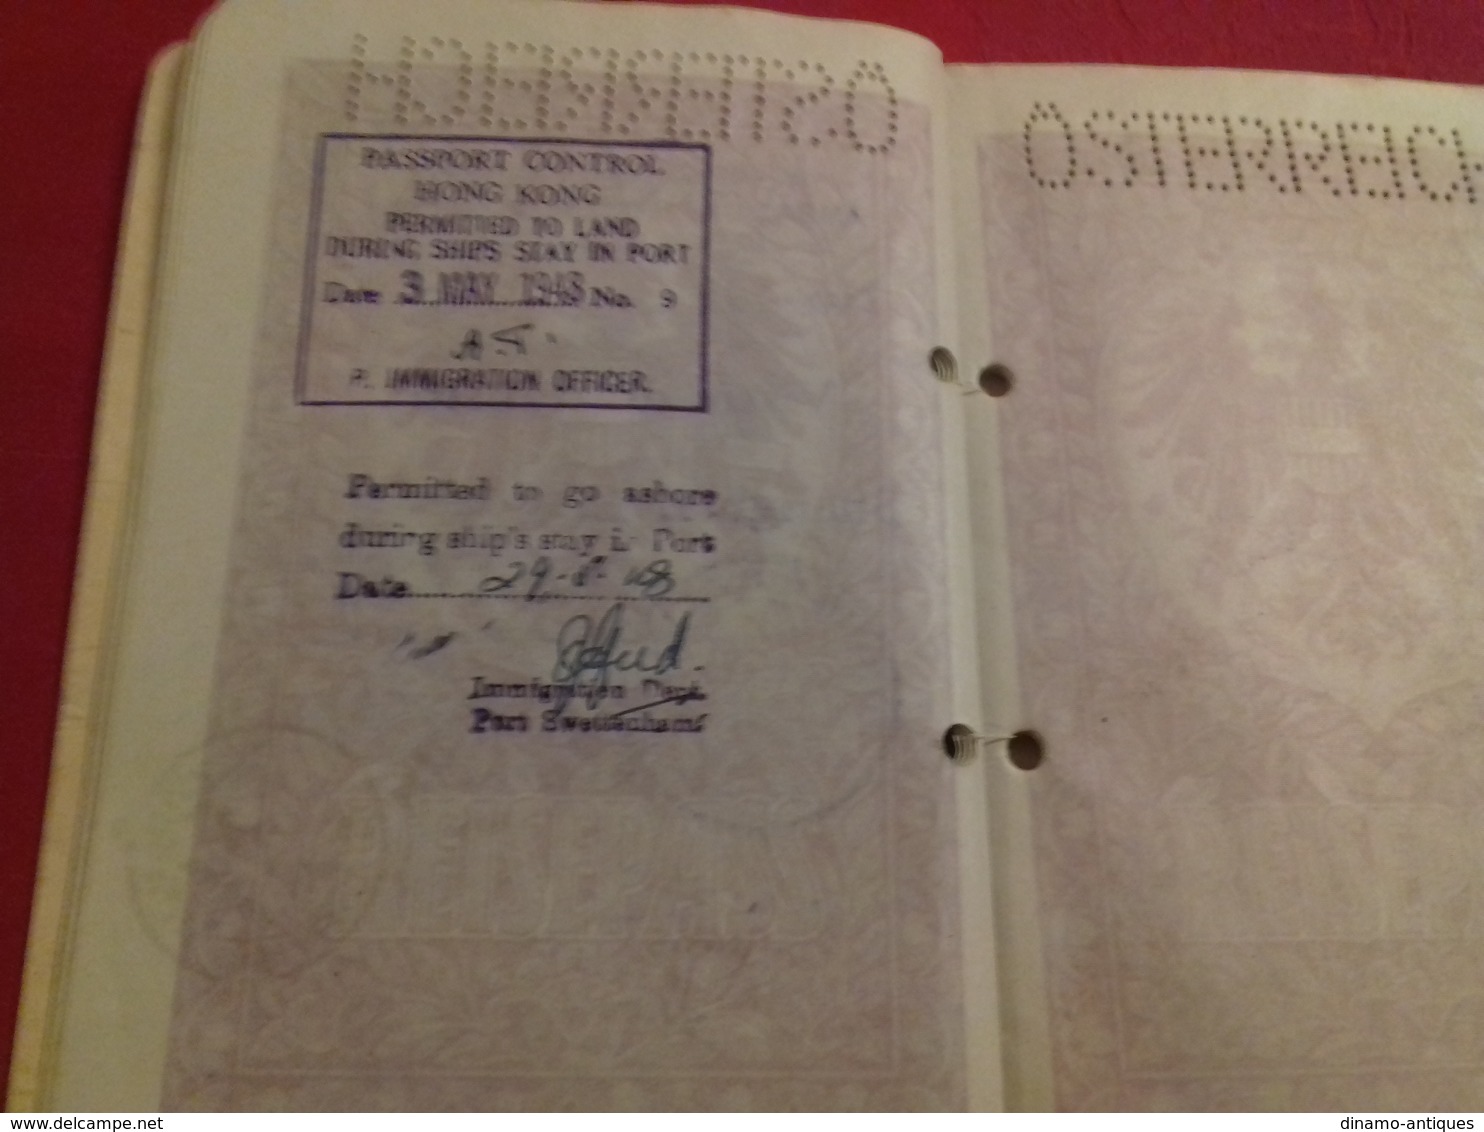 1948 Austria passport passeport reisepass issued in Shanghai China  for a Jewish immigrant for his travel back home